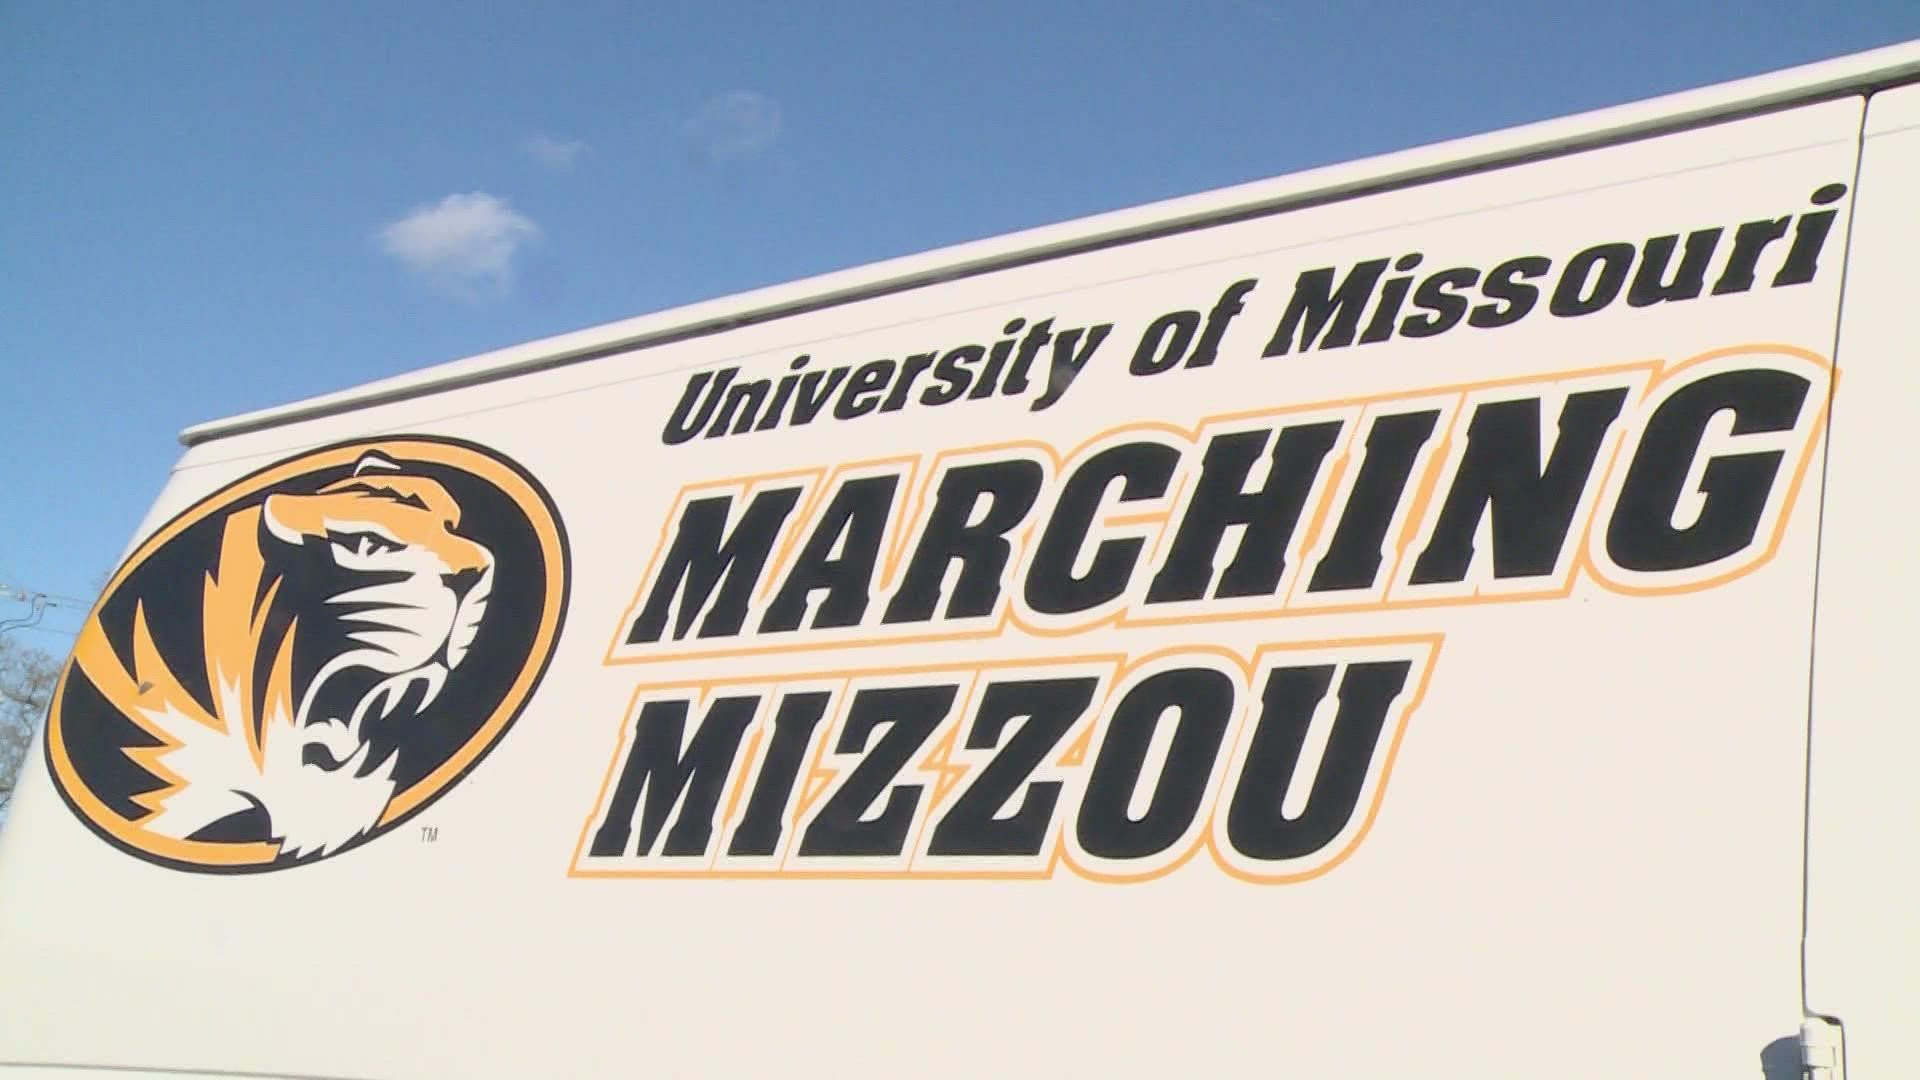 Watch the 350-member University of Missouri marching band perform live starting at 8:45 a.m. Thursday on 5 On Your Side.